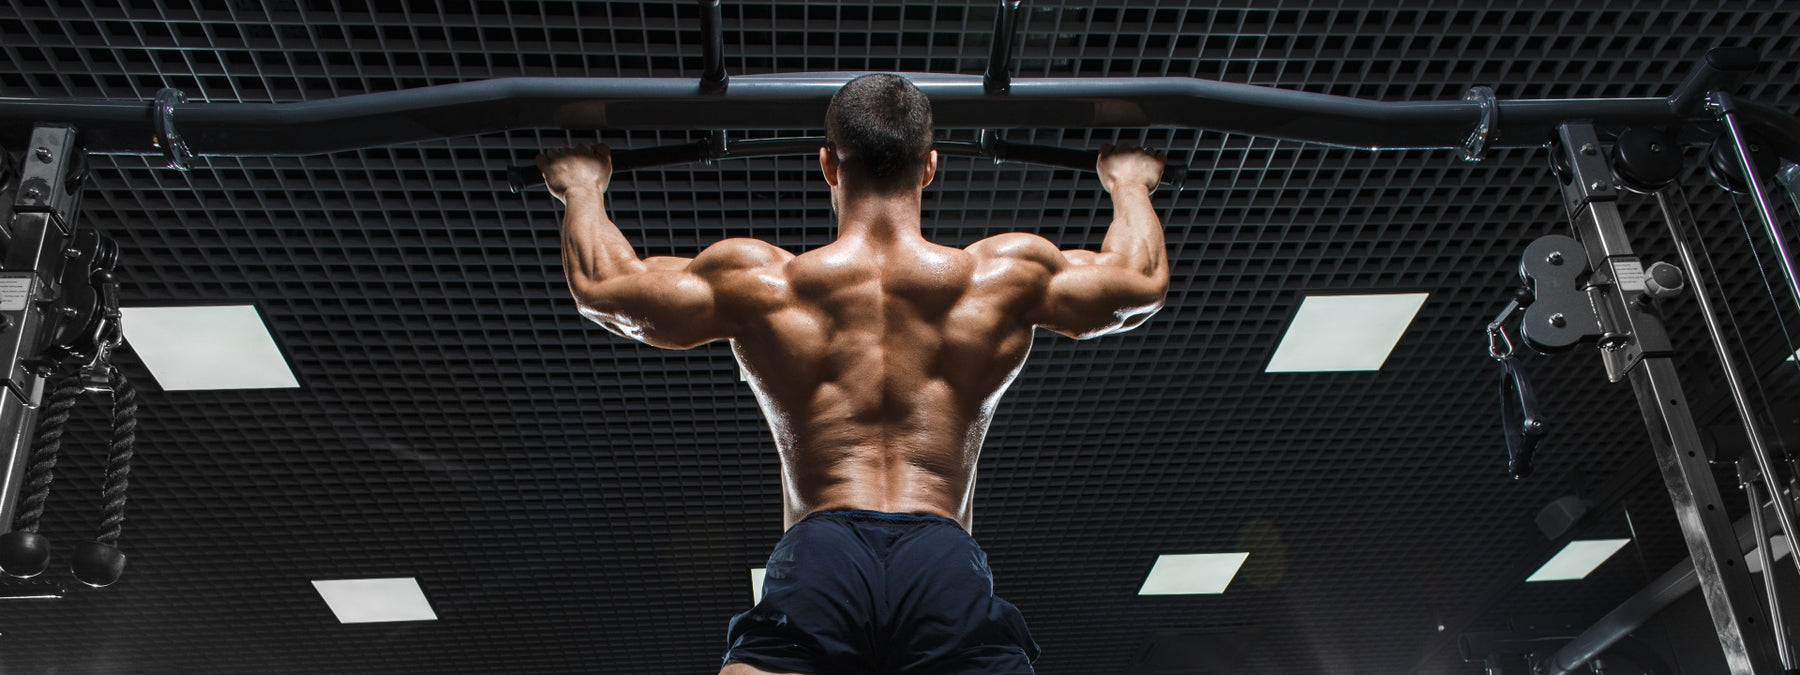 11 Feats of Strength That Every Lifter Should Accomplish